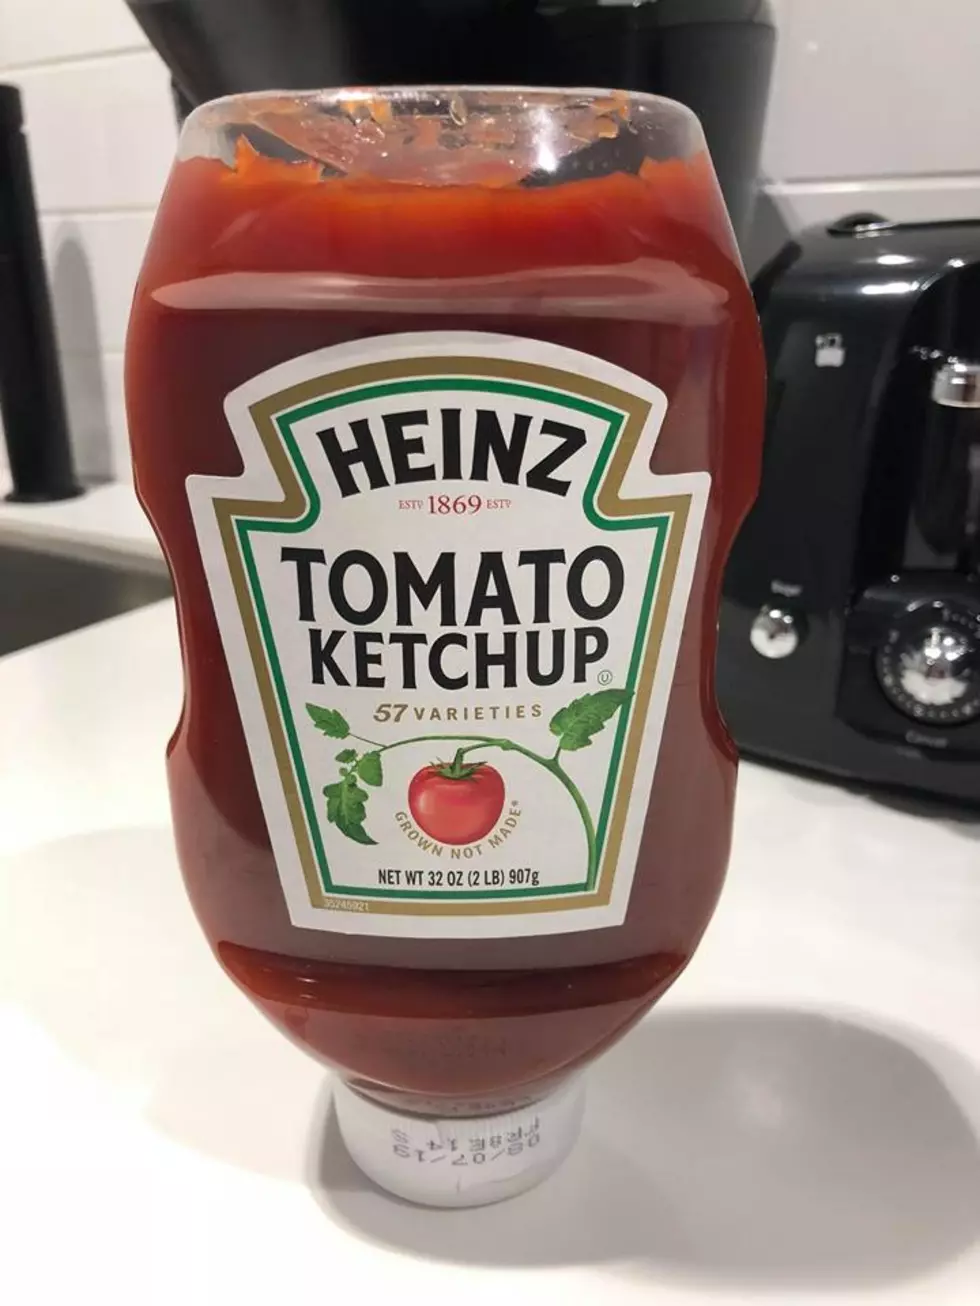 Little Boy’s Reaction to Ketchup has Gone Viral [Video]